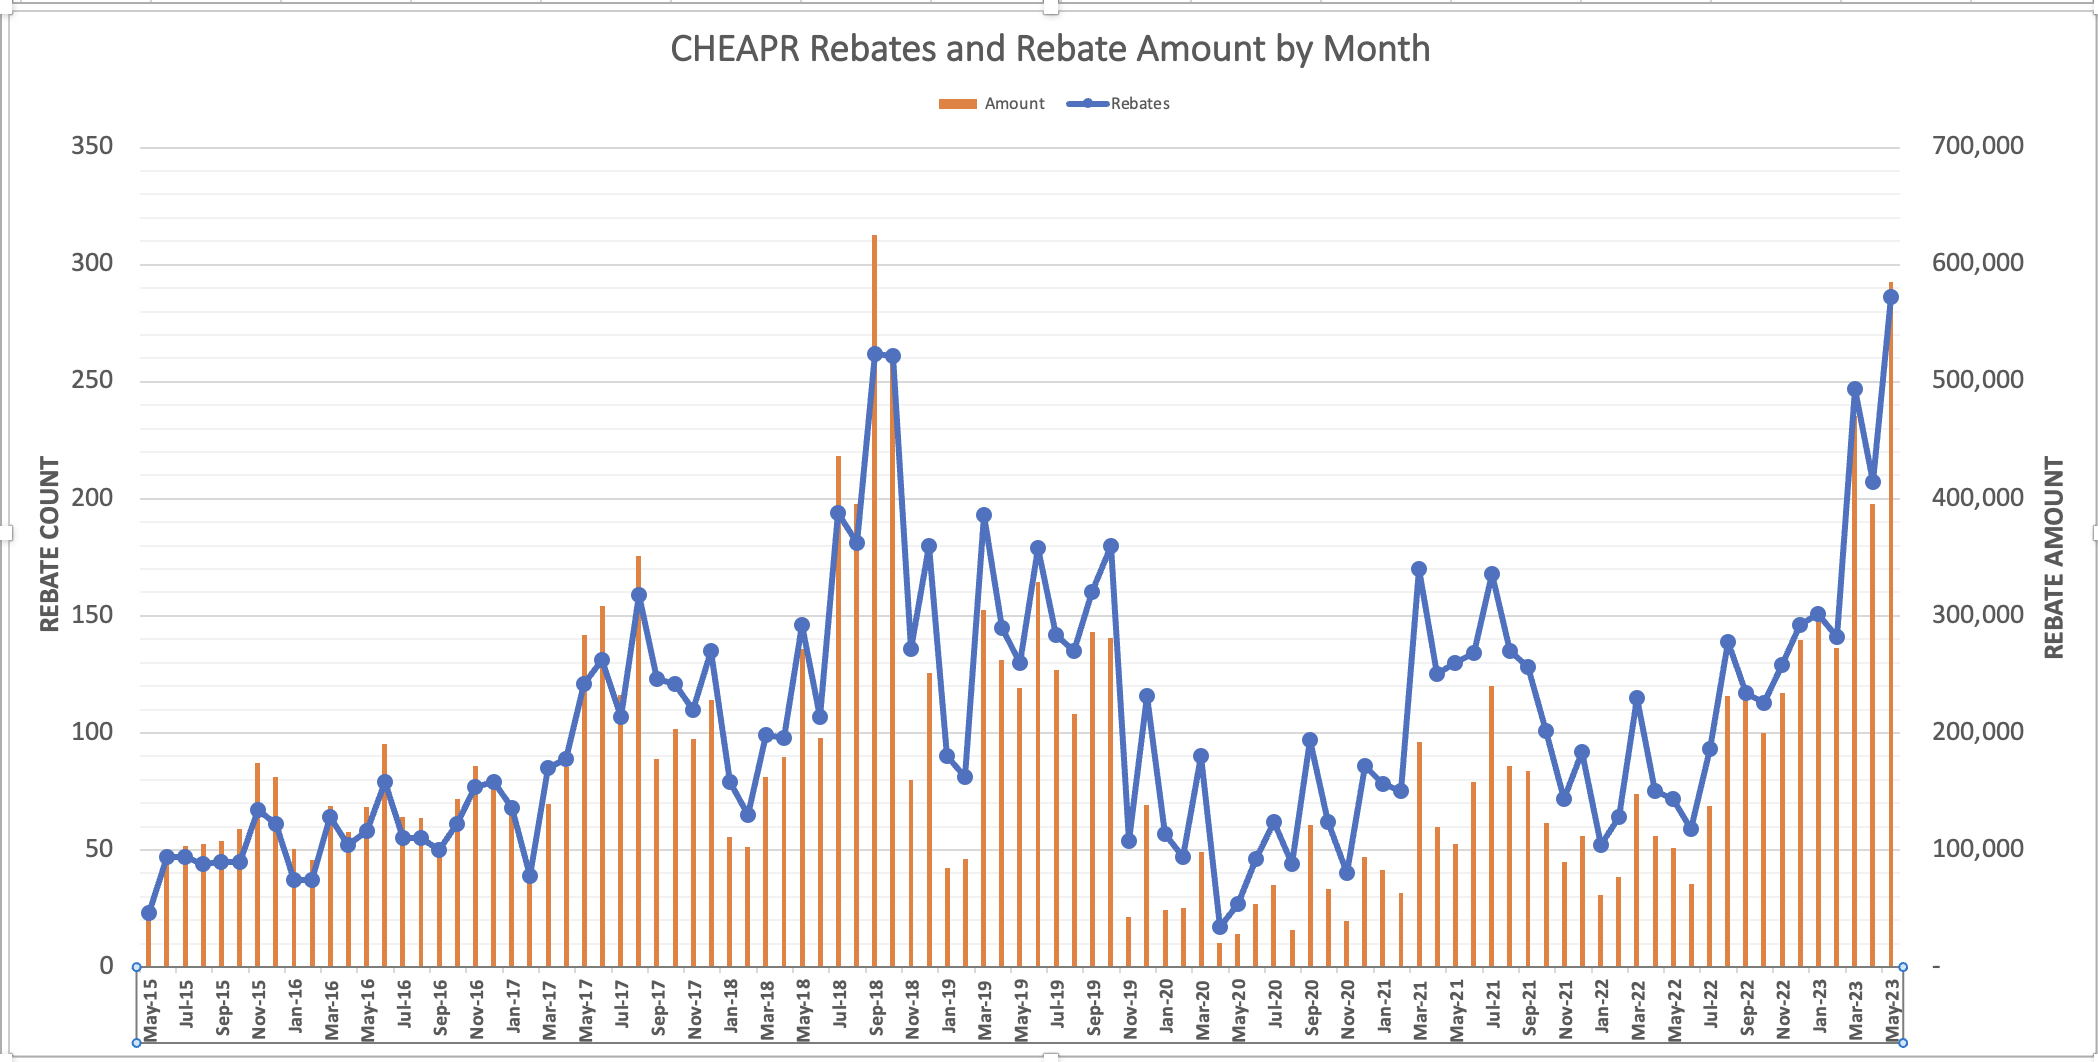 CHEAPR Rebates and Rebate Amount by Month Through May 2023